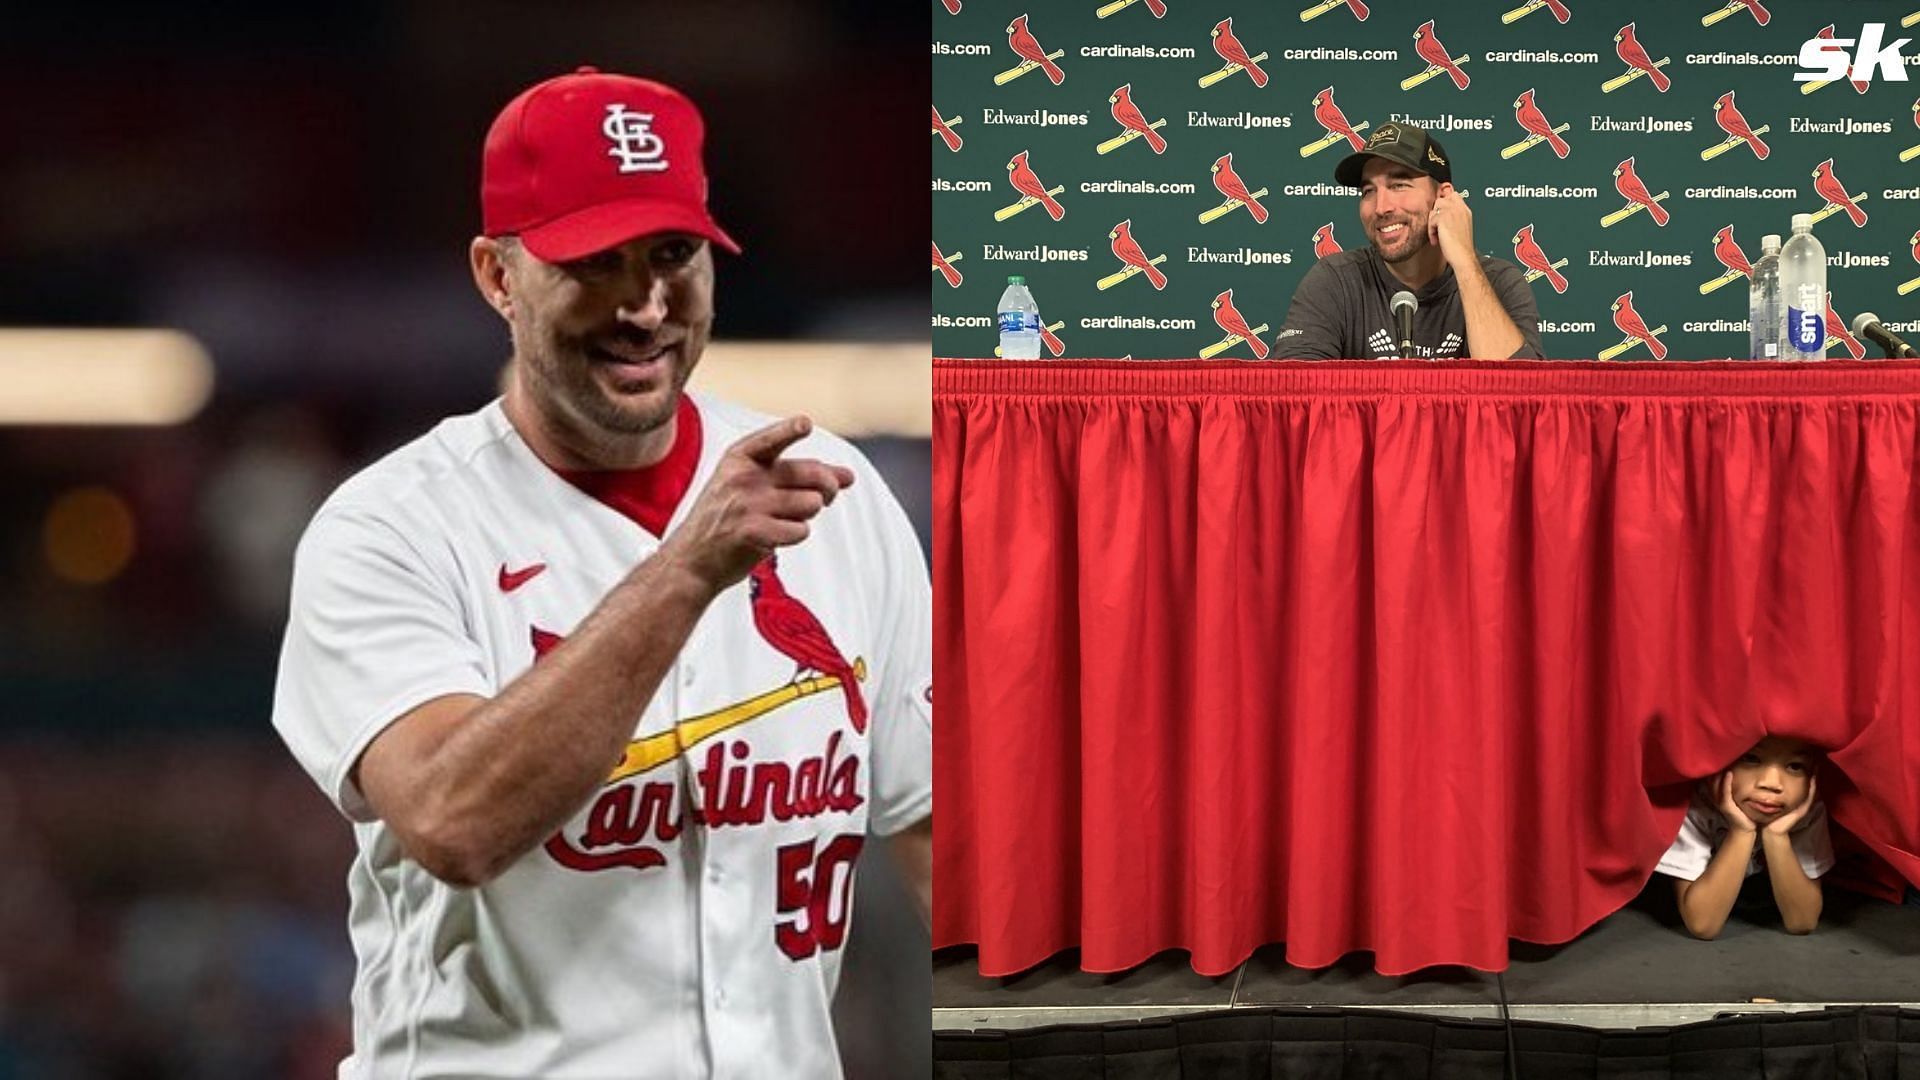 In Photos: Adam Wainwright's son steals the show with adorable